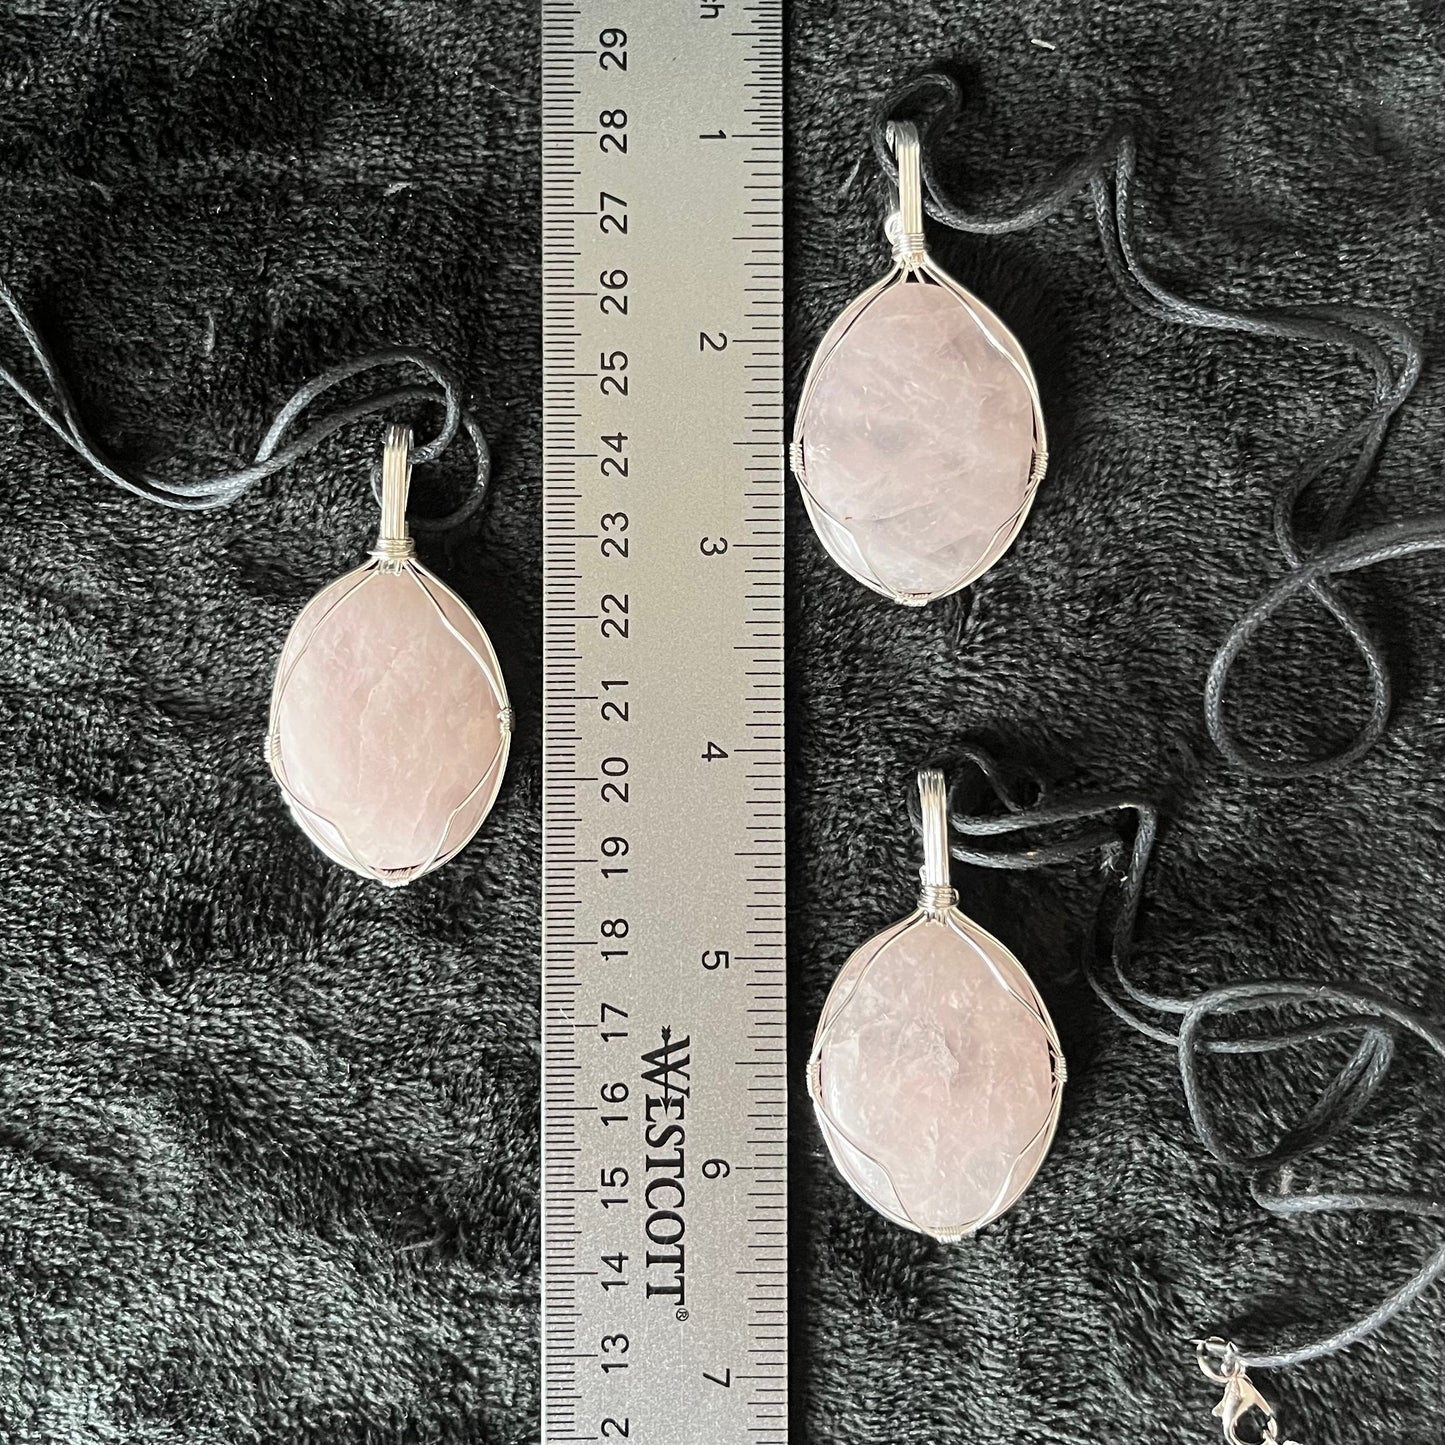   Silver wire wrapped with ornate and delicate frames, these translucent pink rose quartz worry stone pendants are approximately 1 1/2" long, and attached to adjustable black cords and displayed next to a ruler.  